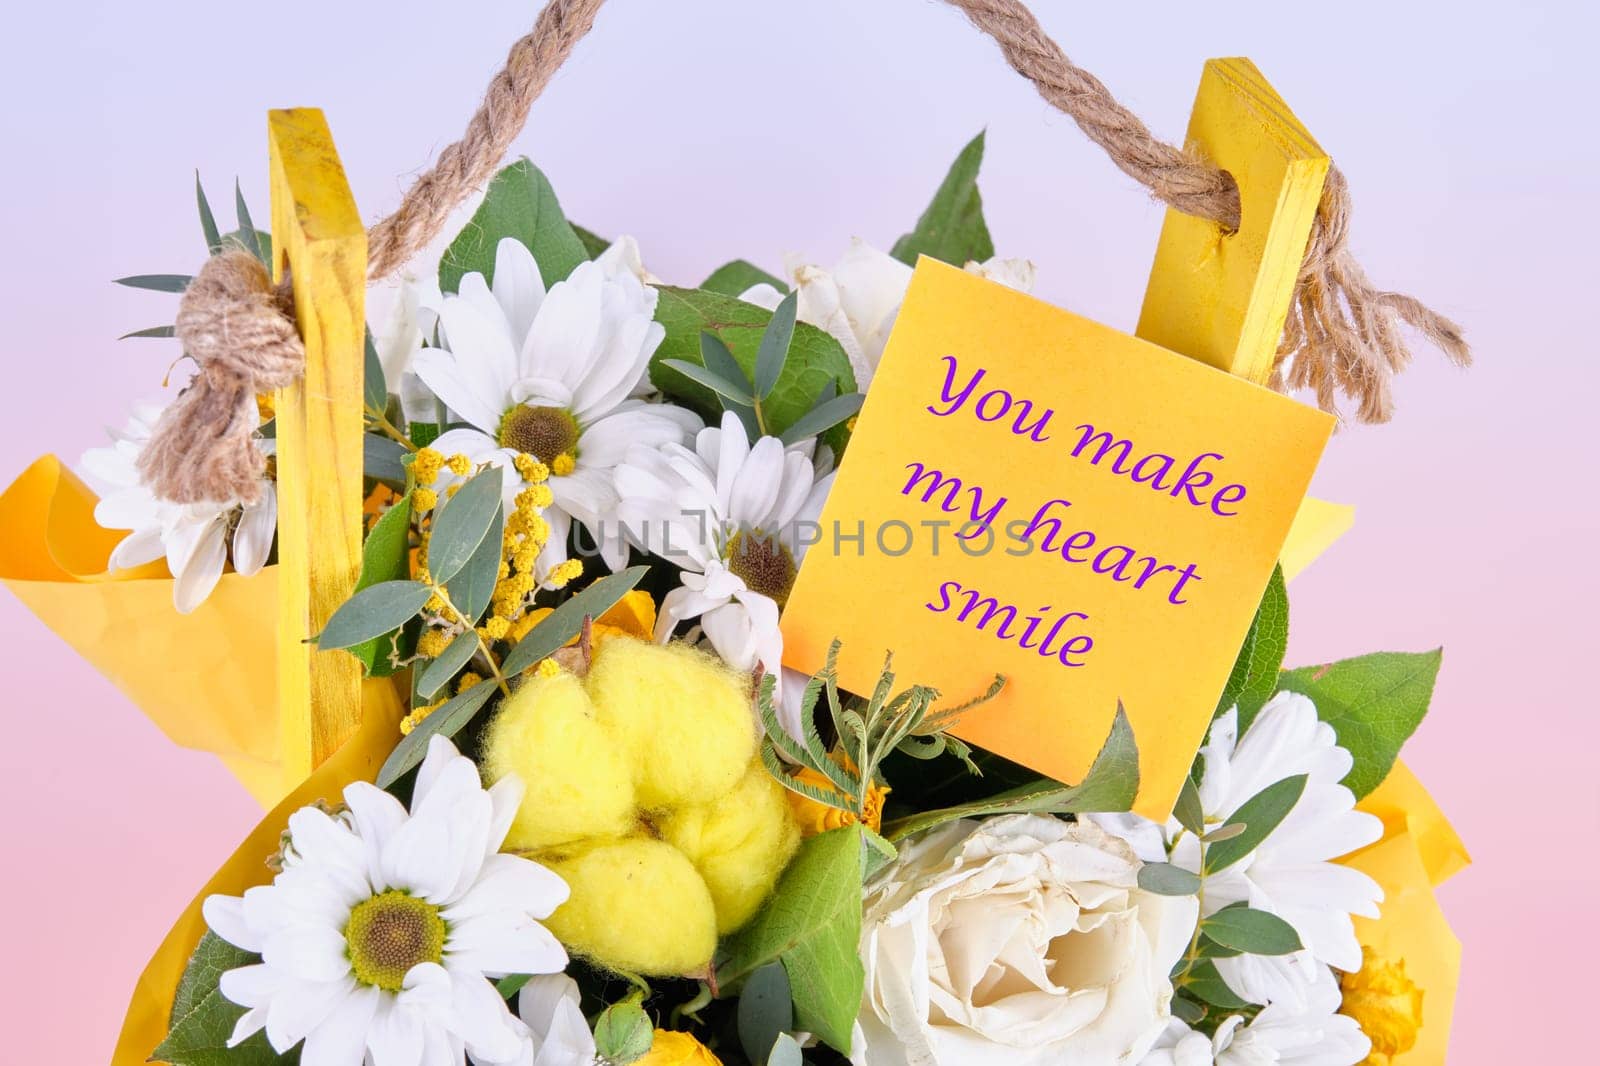 You Make My Heart Smile text on the sticker on the flowers. Concept photo